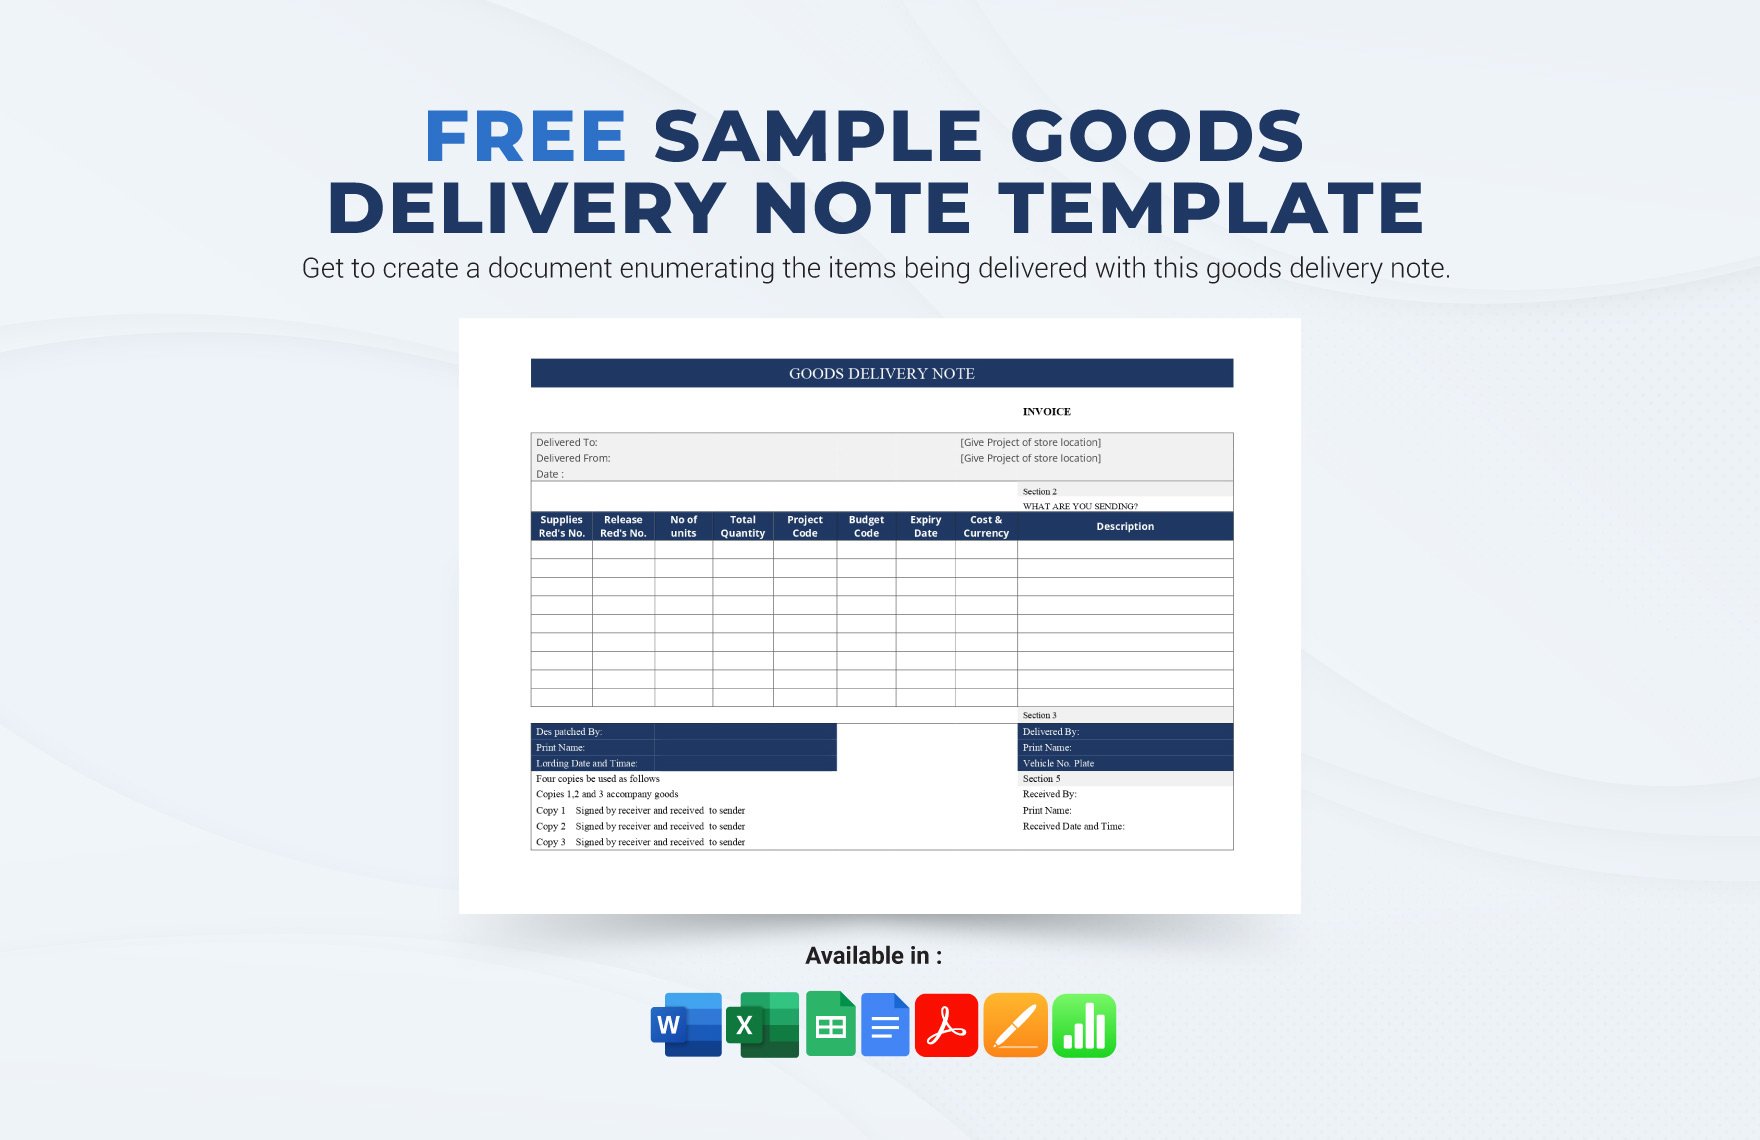 Sample Goods Delivery Note Template